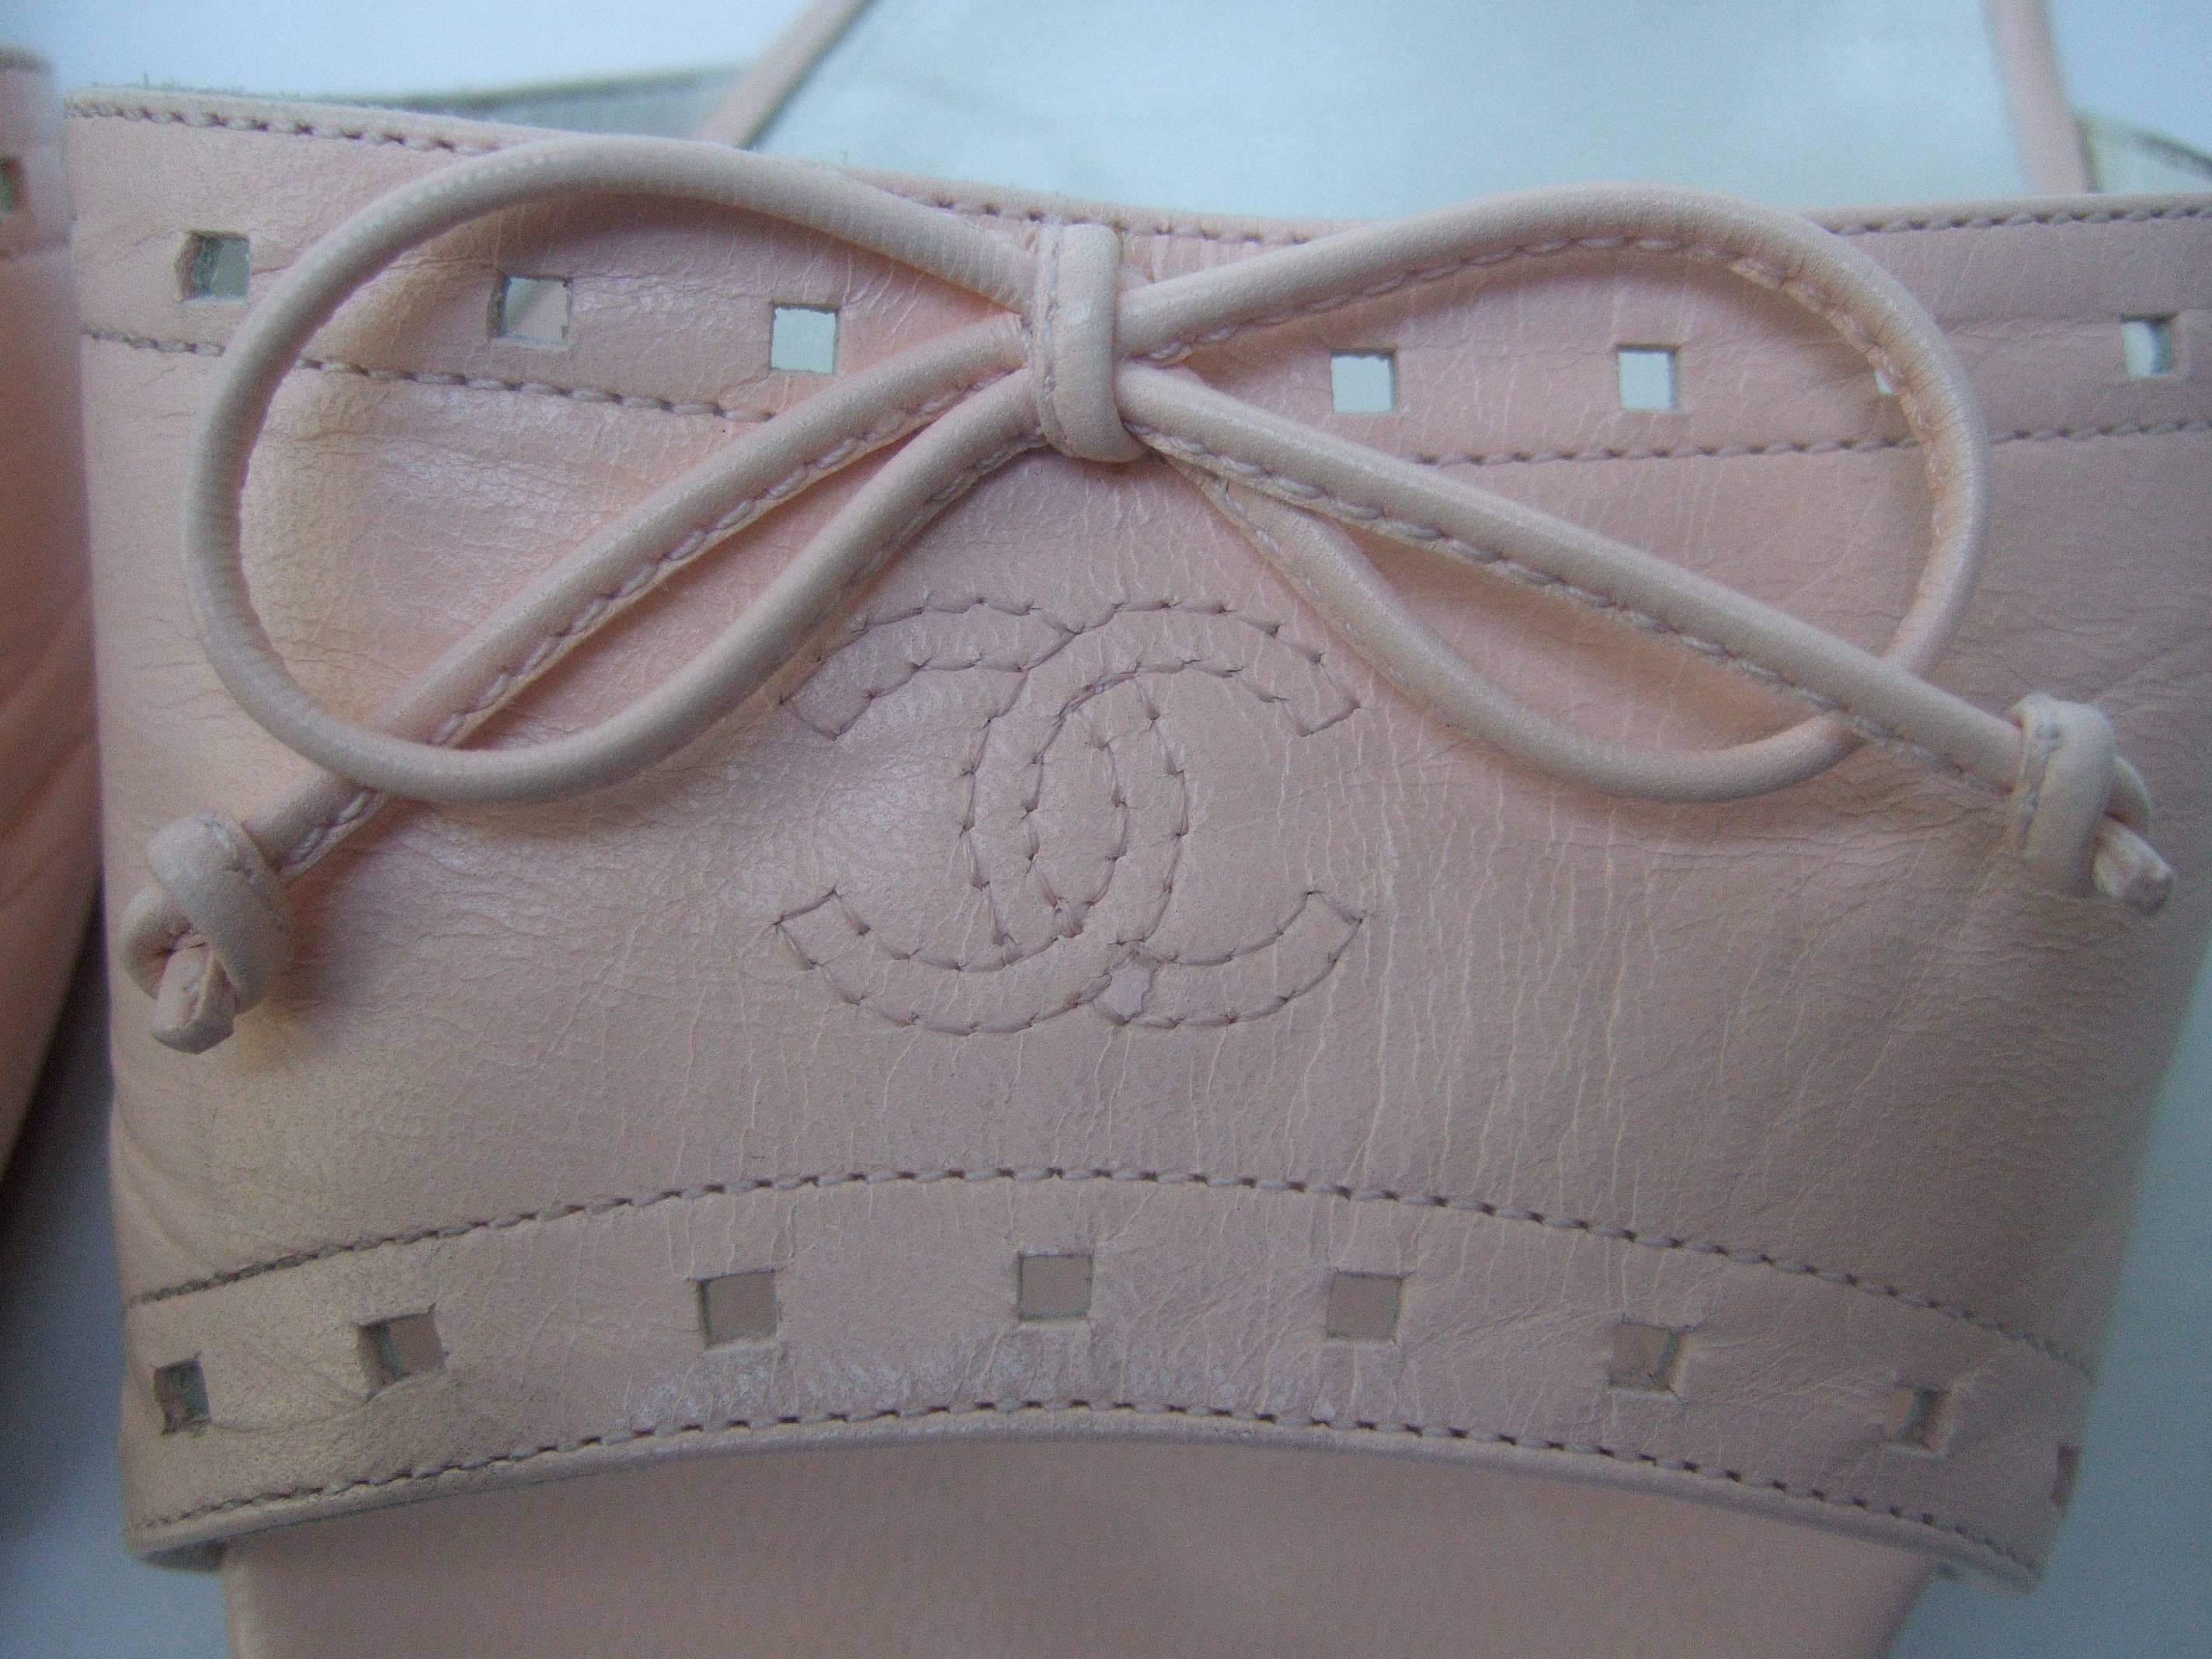 Women's Chanel Classic Pale Pink Leather Mules in Box Size 40